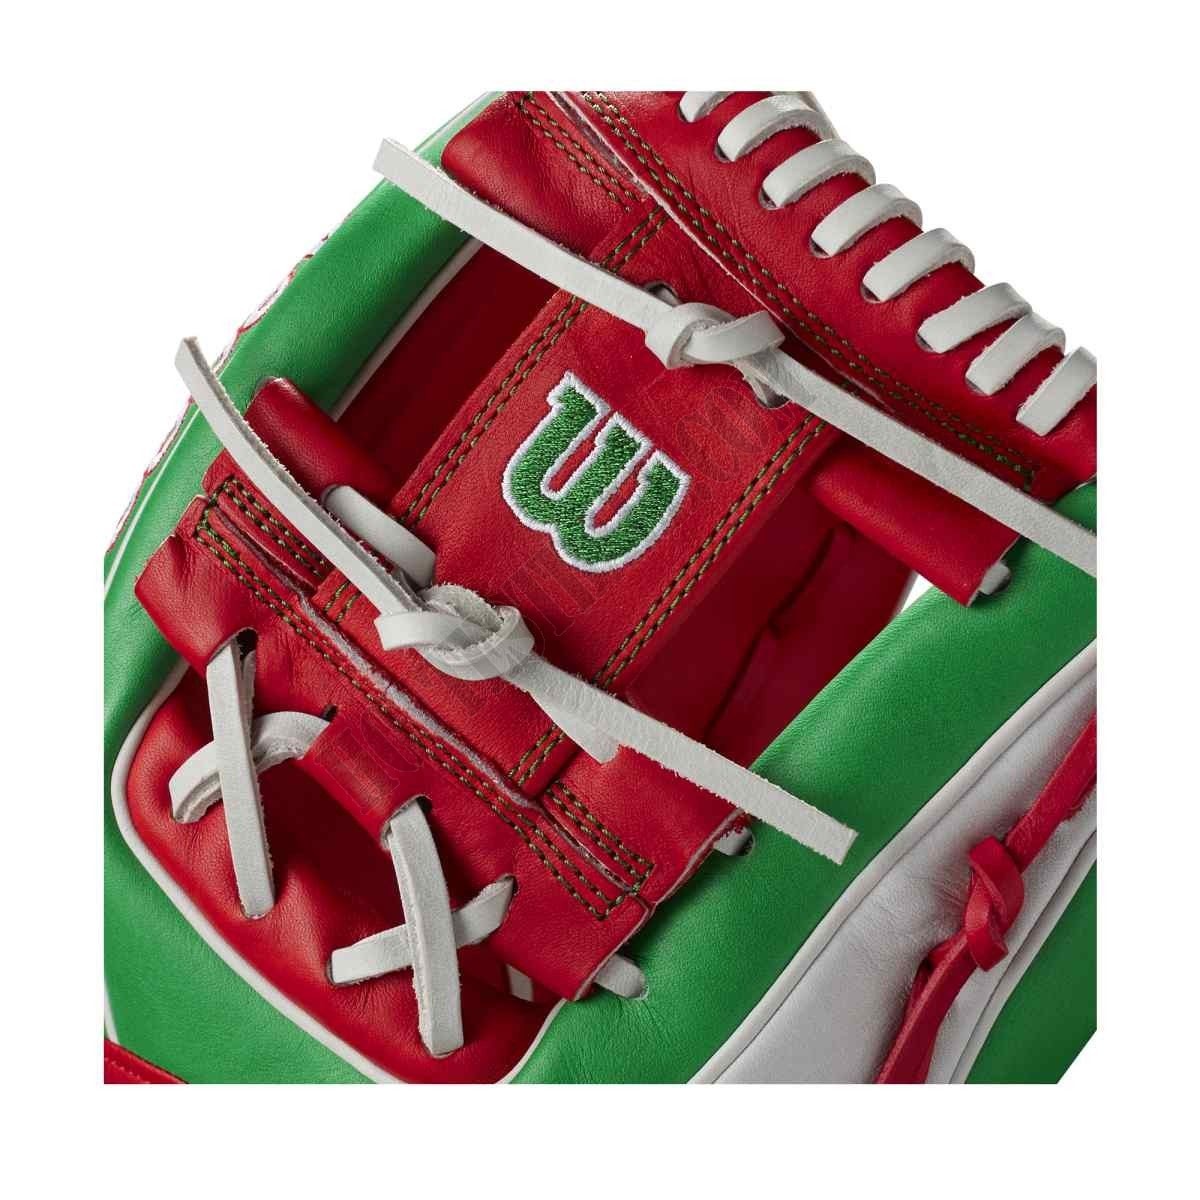 2021 A2000 1786 Mexico 11.5" Infield Baseball Glove - Limited Edition ● Wilson Promotions - -5